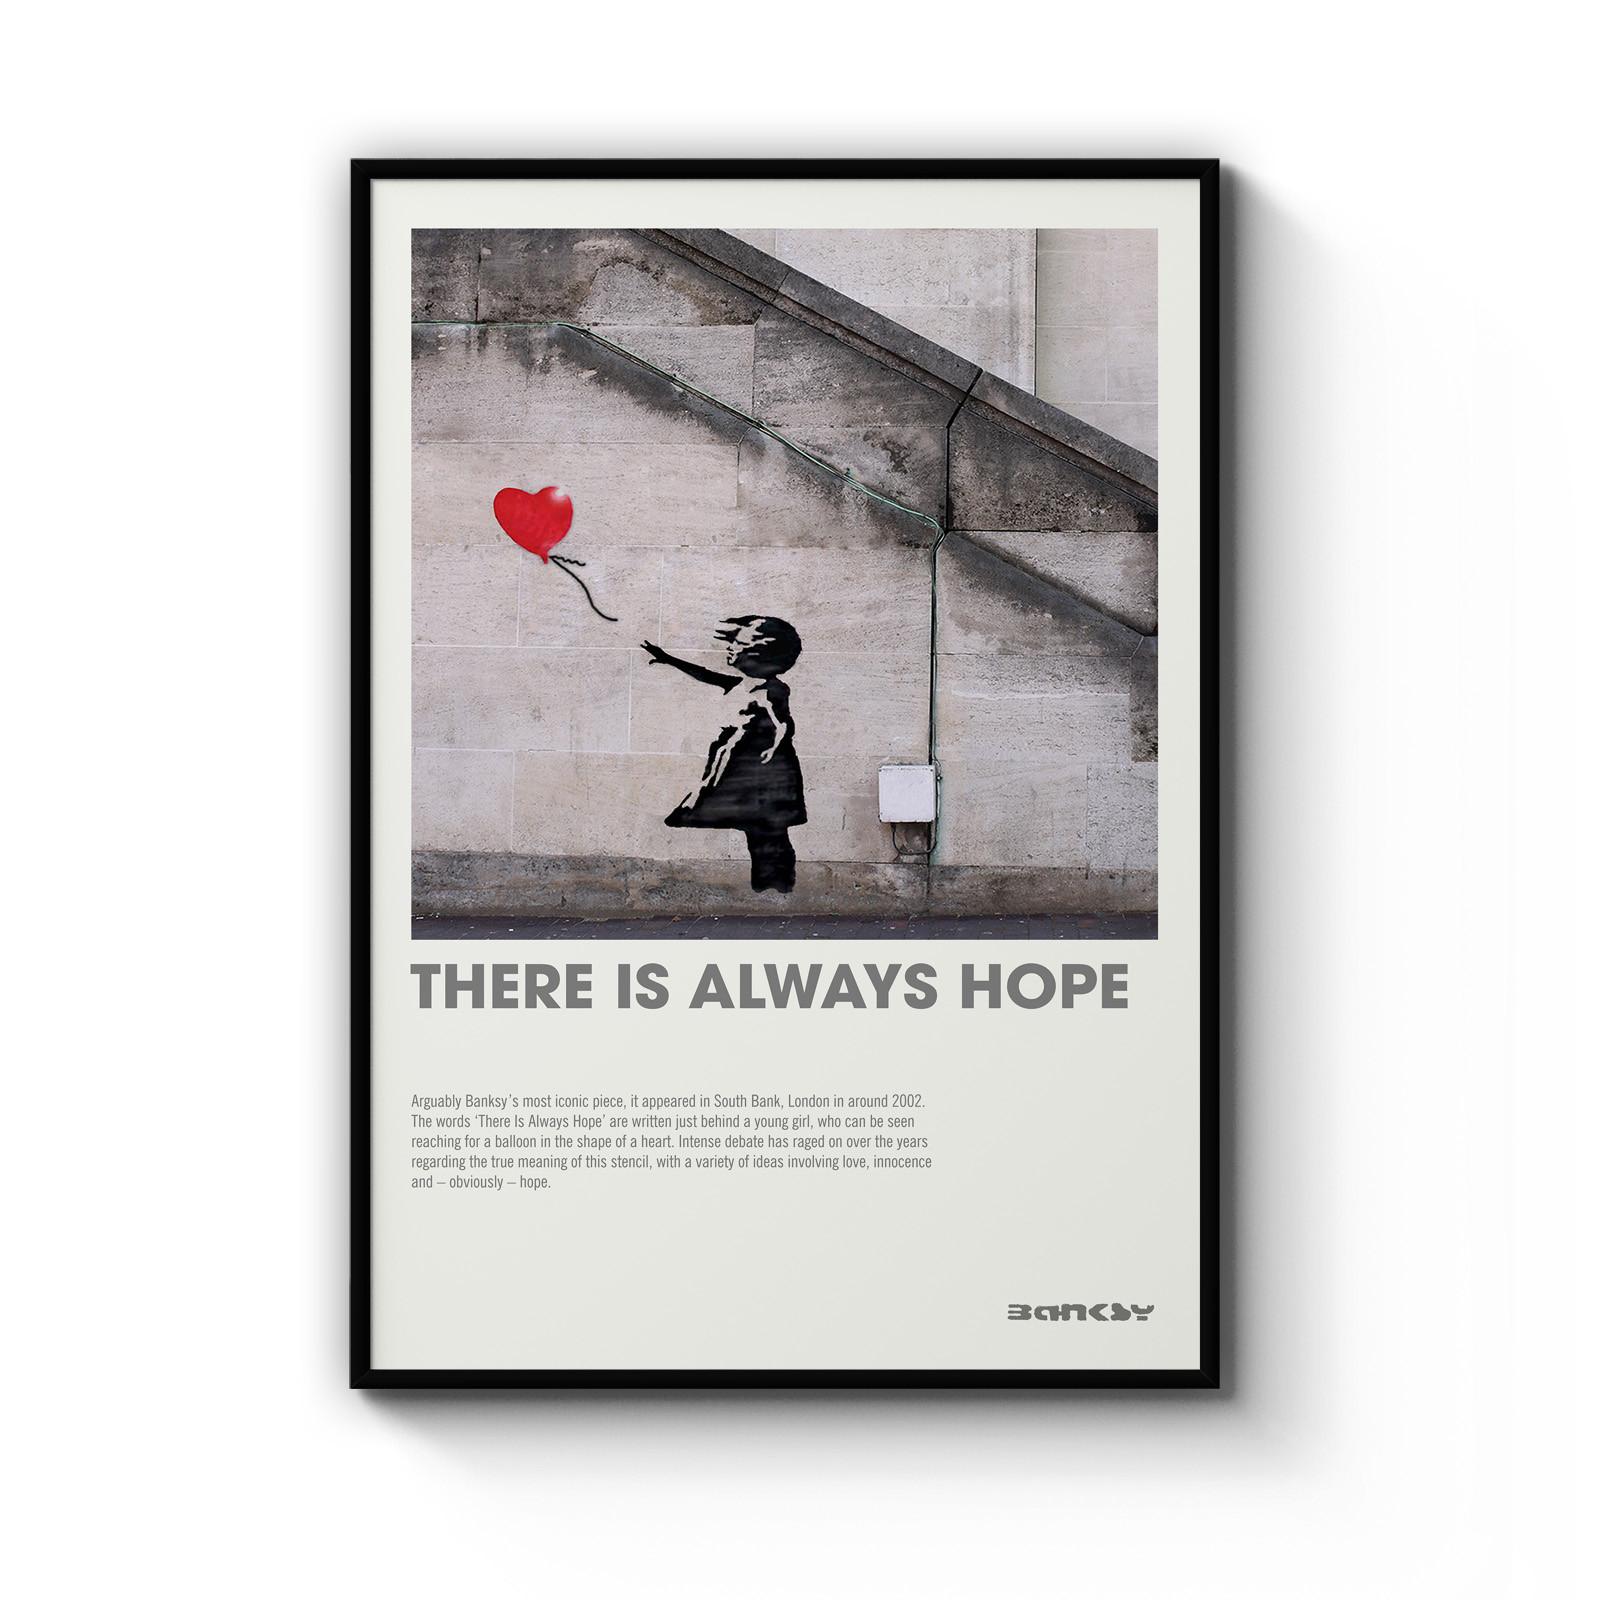 A4 A3 A2 A1 A0 Framed Banksy "There Is Always Hope" Art Poster Print 